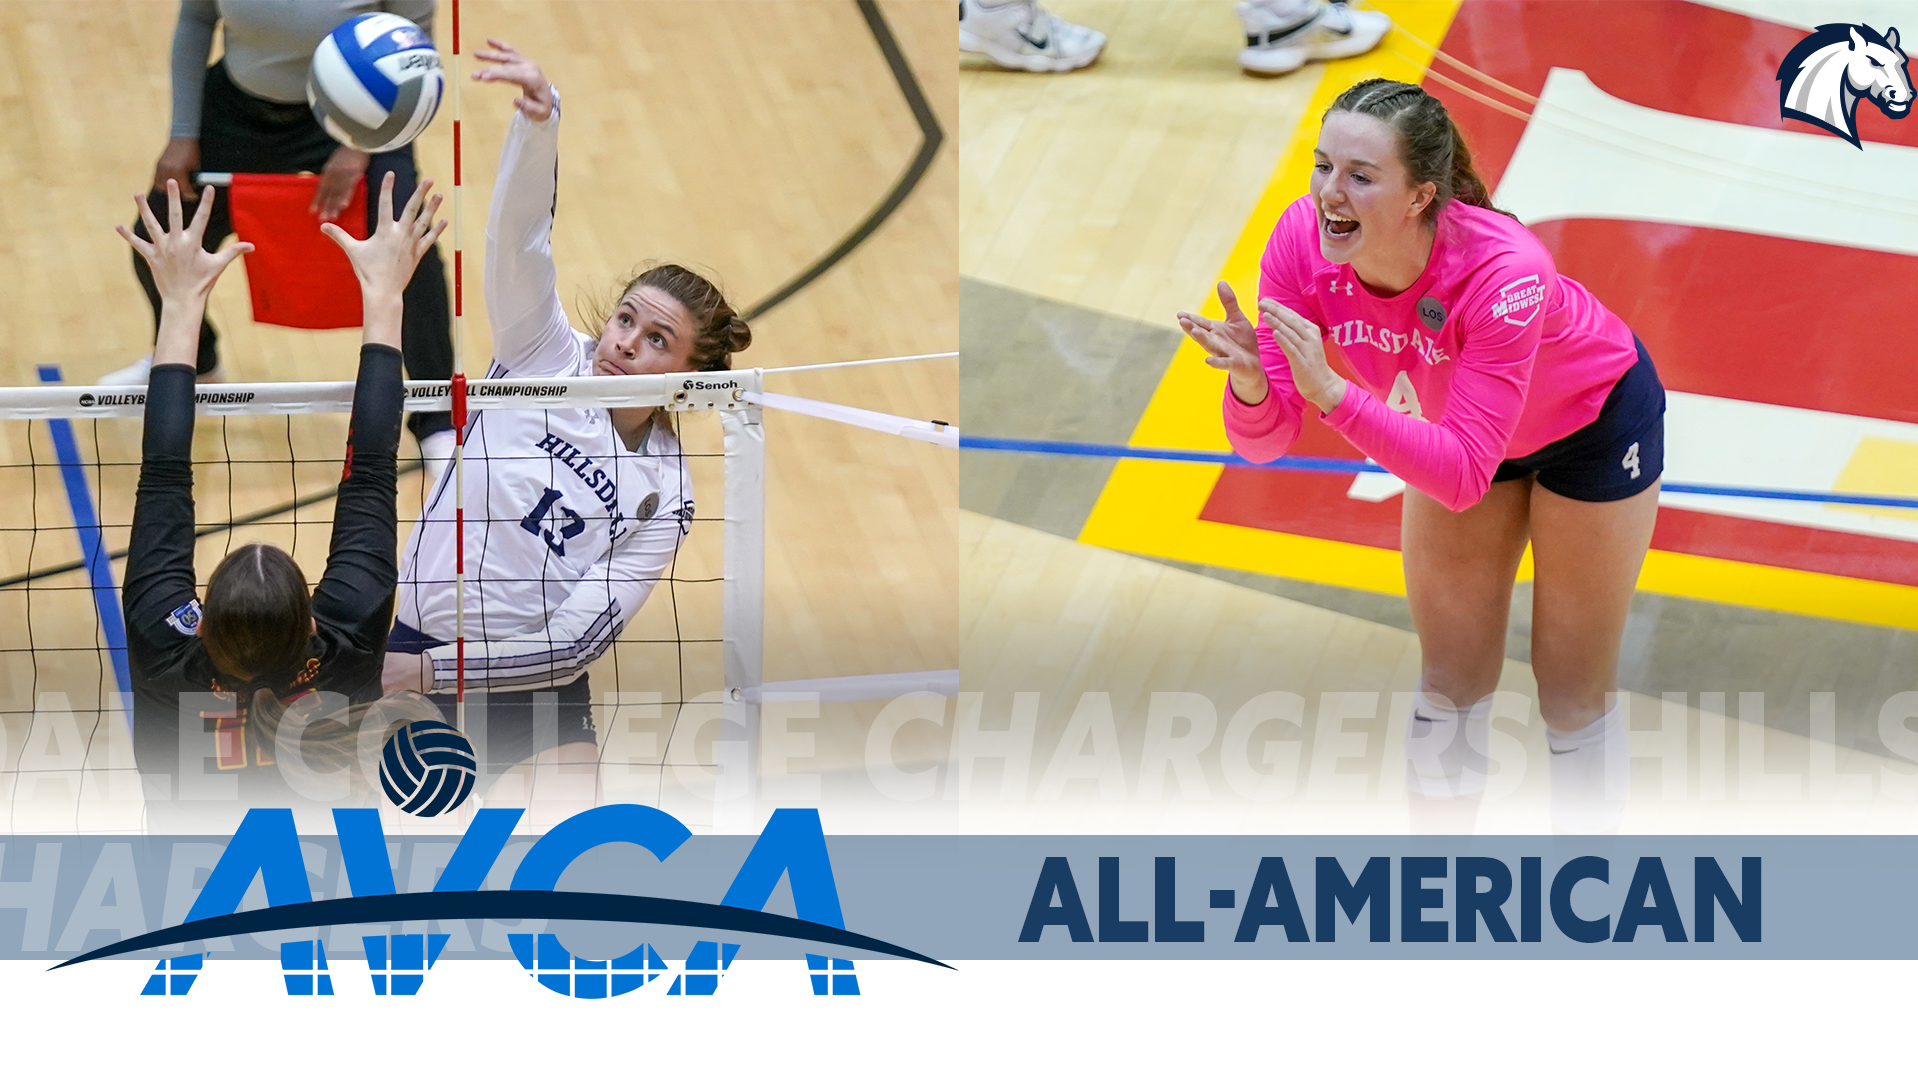 Chargers Popplewell, Wiese, earn All-American honors from AVCA